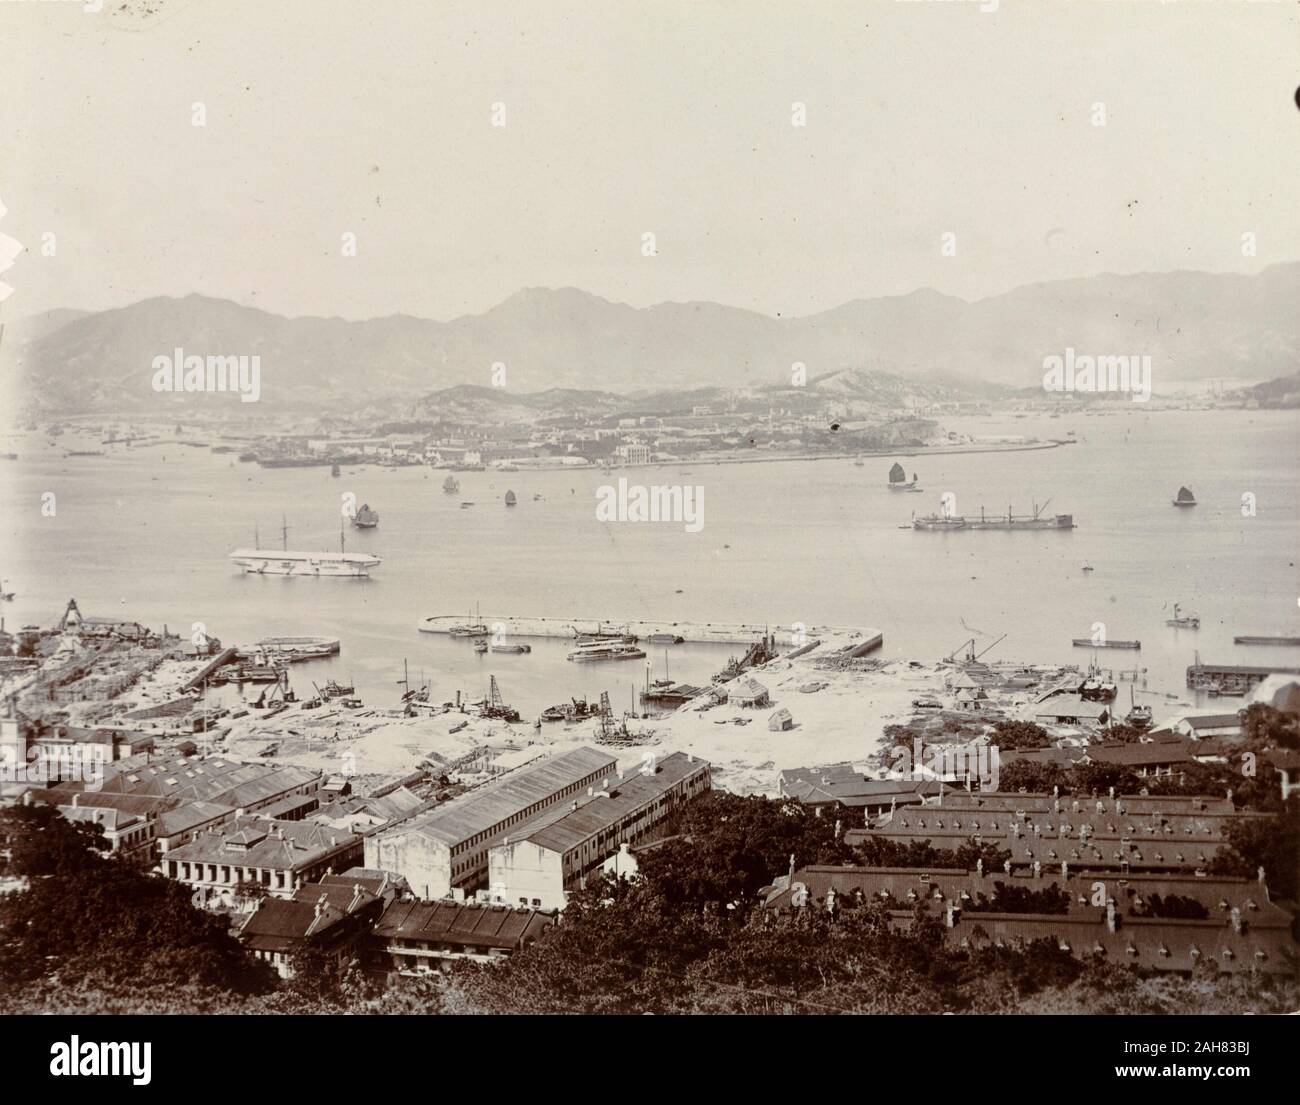 Hong KongChina, A view of Victoria Harbour, taken from Hong Kong Island and overlooking the Kowloon peninsula. A Royal Navy dockyard can be seen off Hong Kong Island, where several ships of the naval fleet are moored. Original manuscript caption: Part of Hong Kong Harbour. Man- of- War anchorage with H.M.S. 'Tamar' Depot Ship (white with roof) New naval dock in foreground. Kowloon in distance, circa 1903. 1998/028/1/1/1. Stock Photo